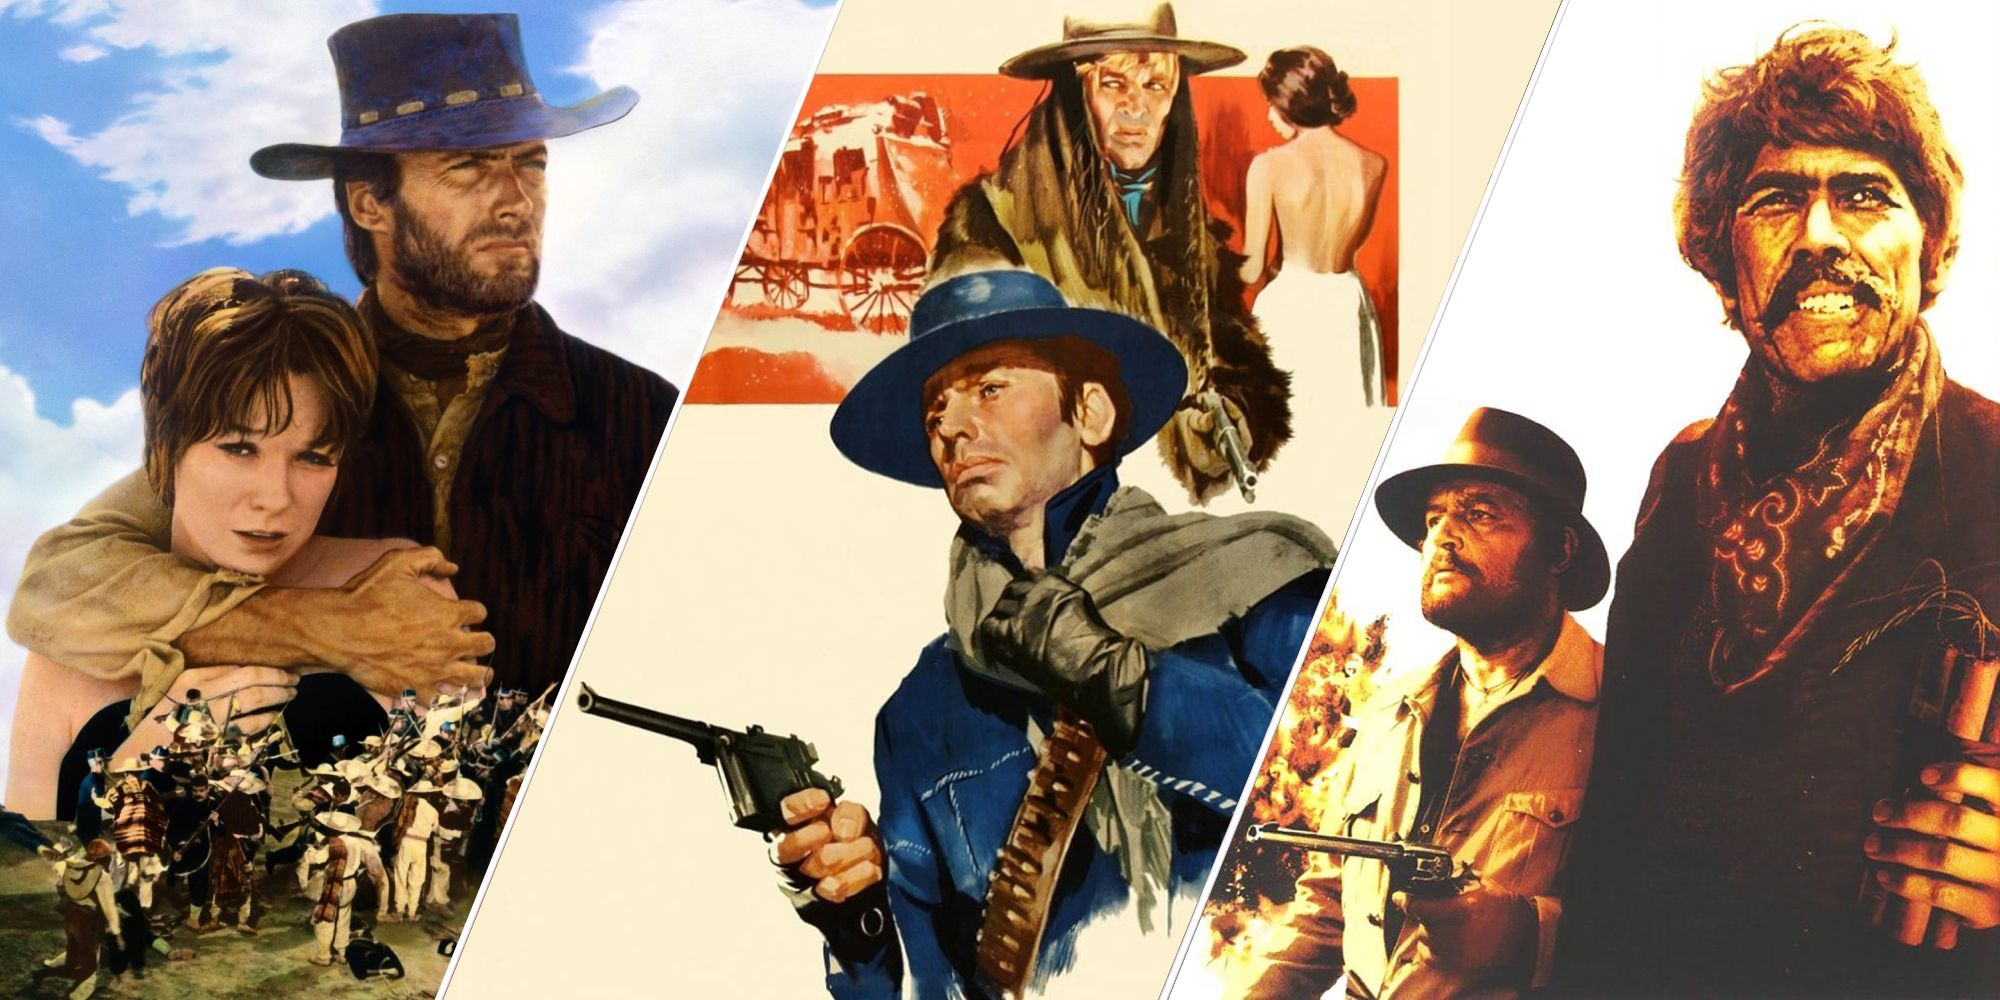 20 Best Westerns of All Time, Ranked